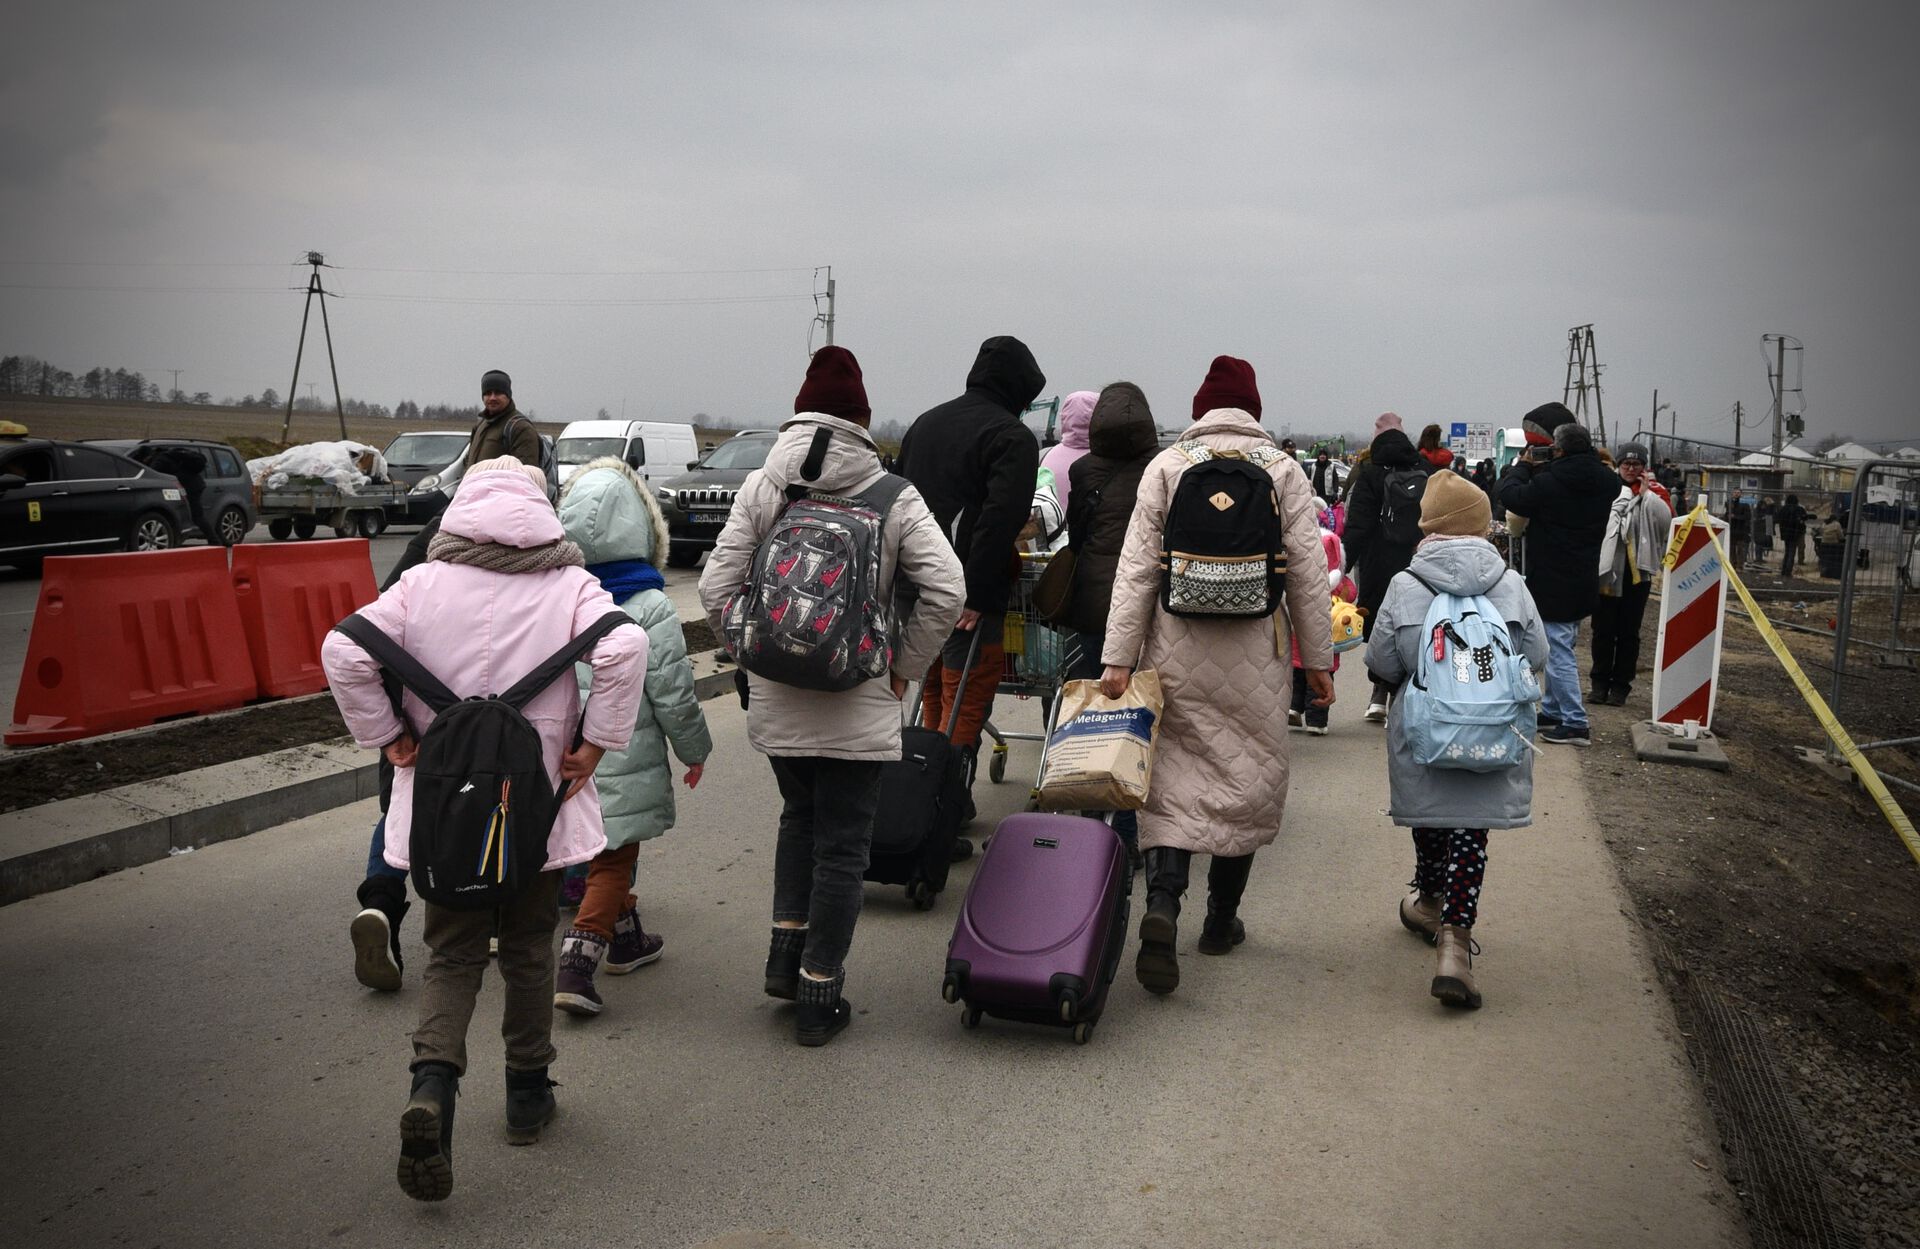 The backs of a group of refugees with luggage on their way to the border between Ukraine and Poland.